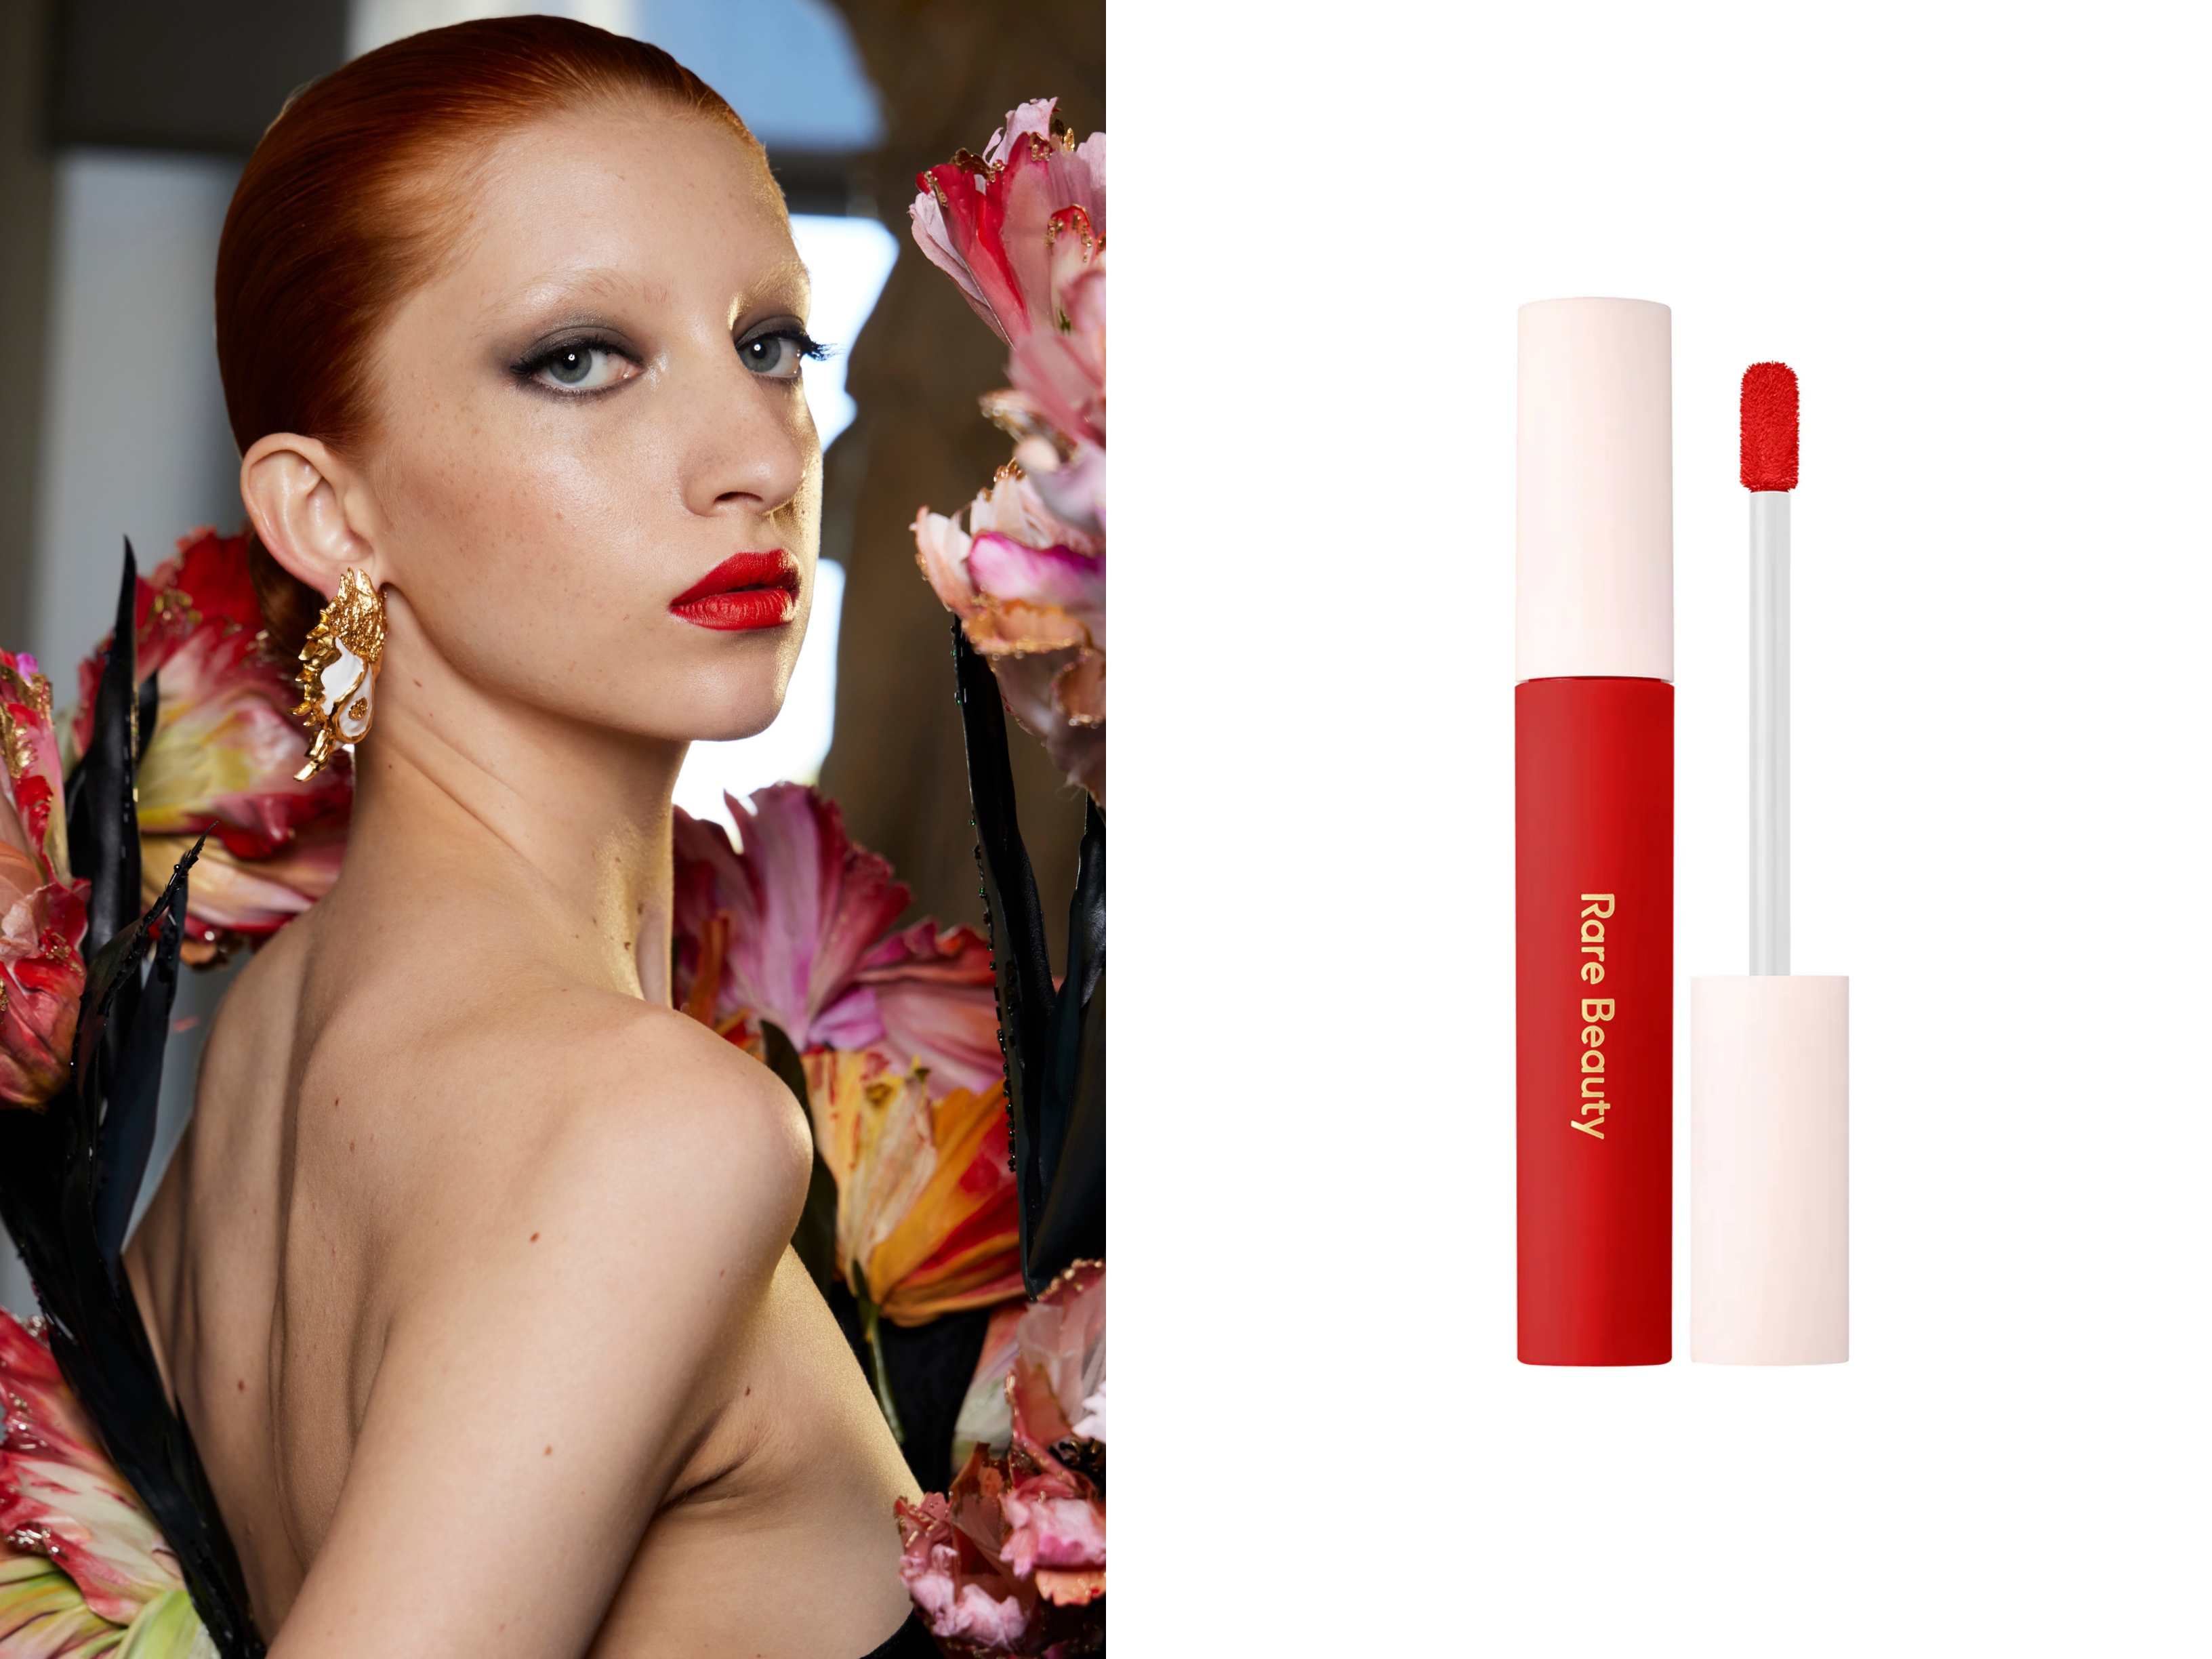 Schiaparelli FW 22/23 and the 'Inspired' shade of the Rare beauty Lip Soufflé